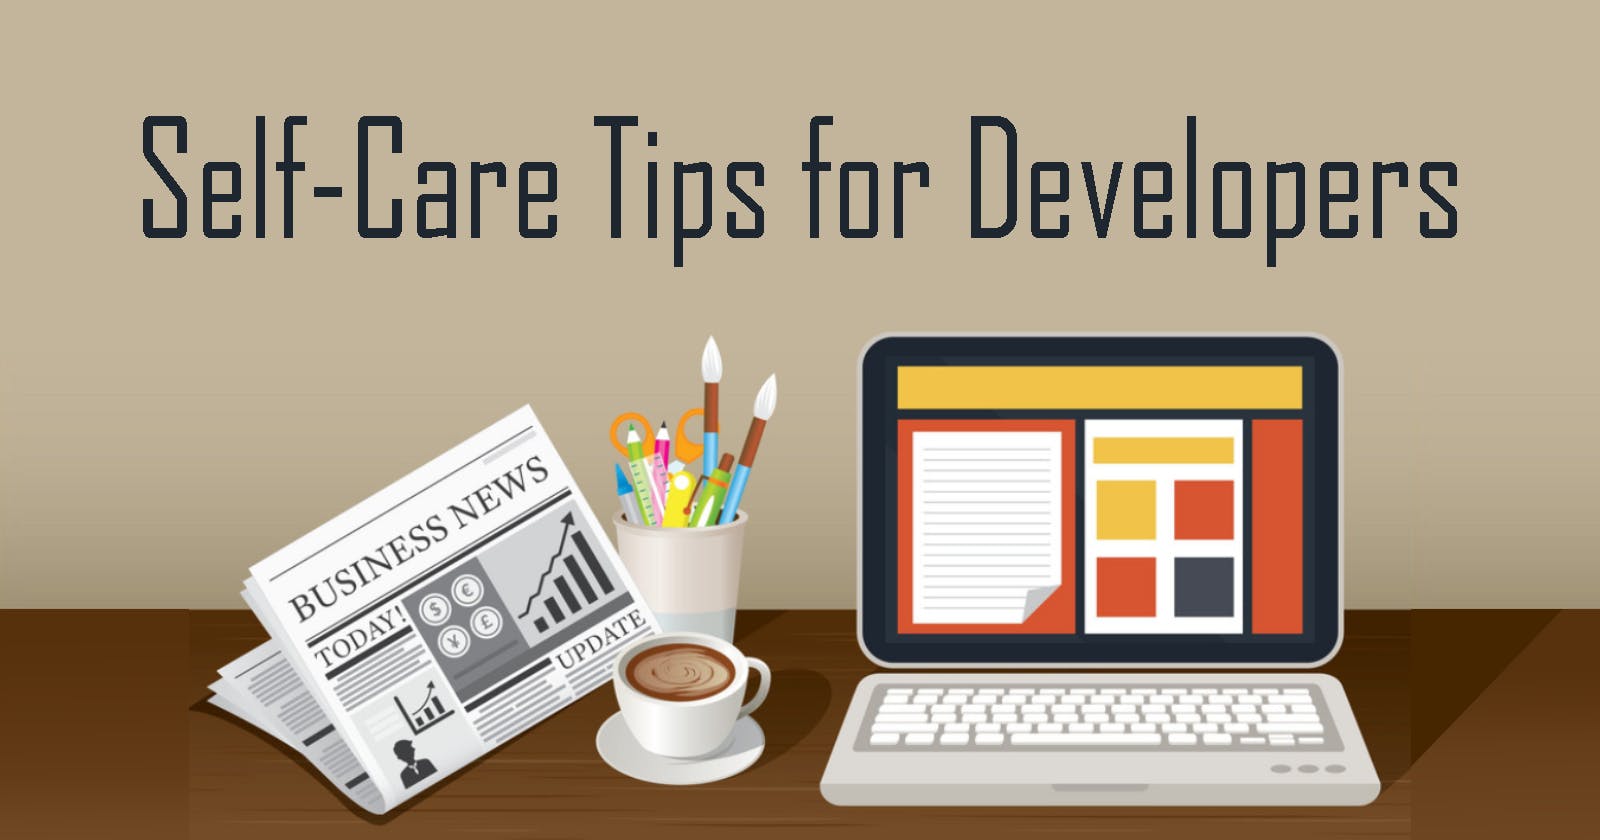 Become a Better Developer with Self-Care